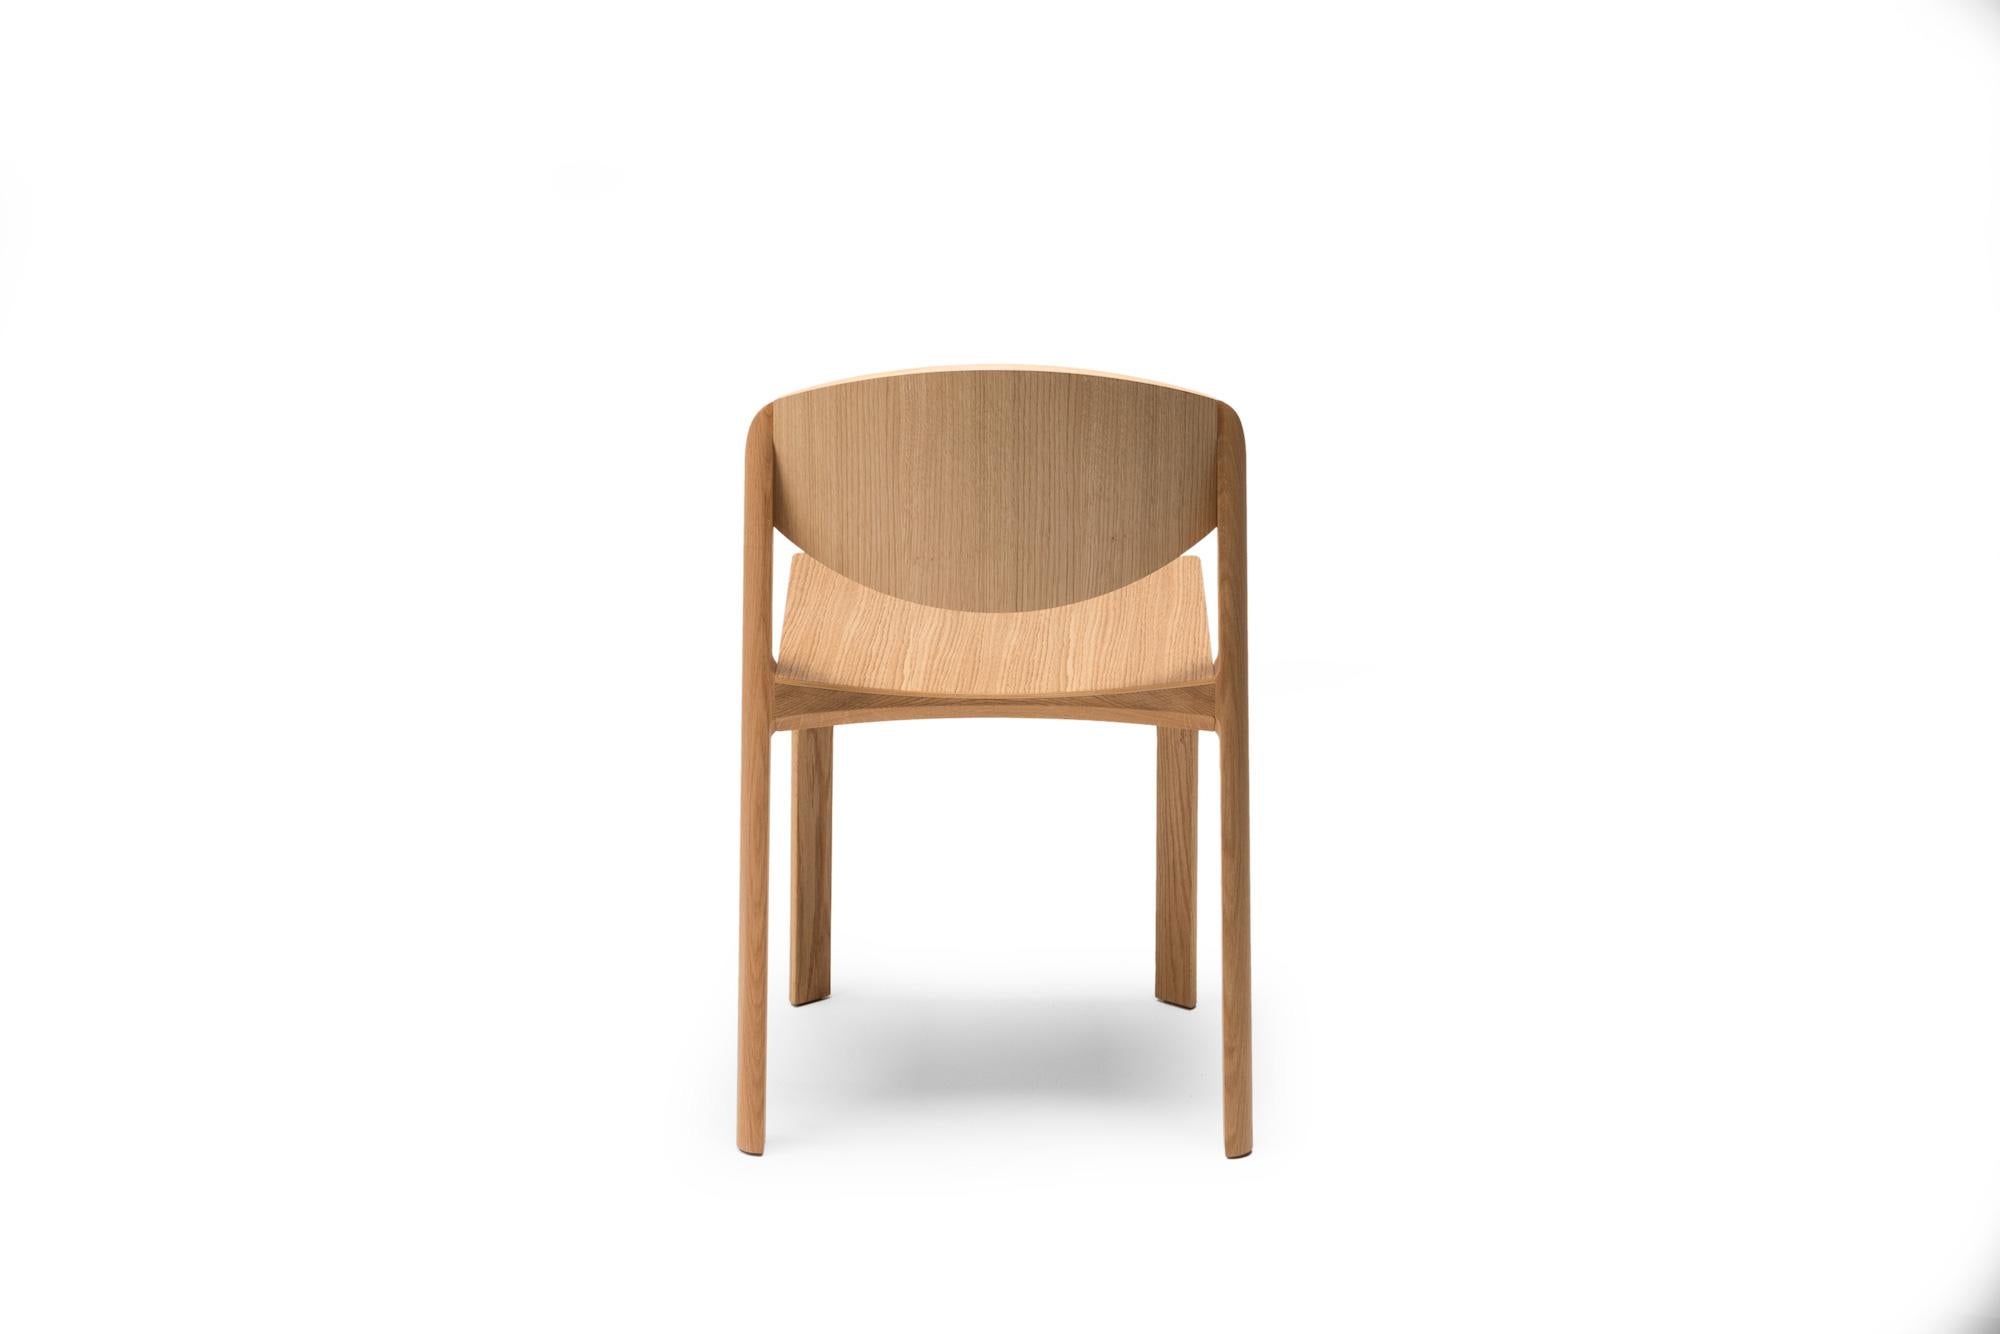 For Sale: Brown (6311) Established & Sons Mauro Chair by Mauro Pasquinelli